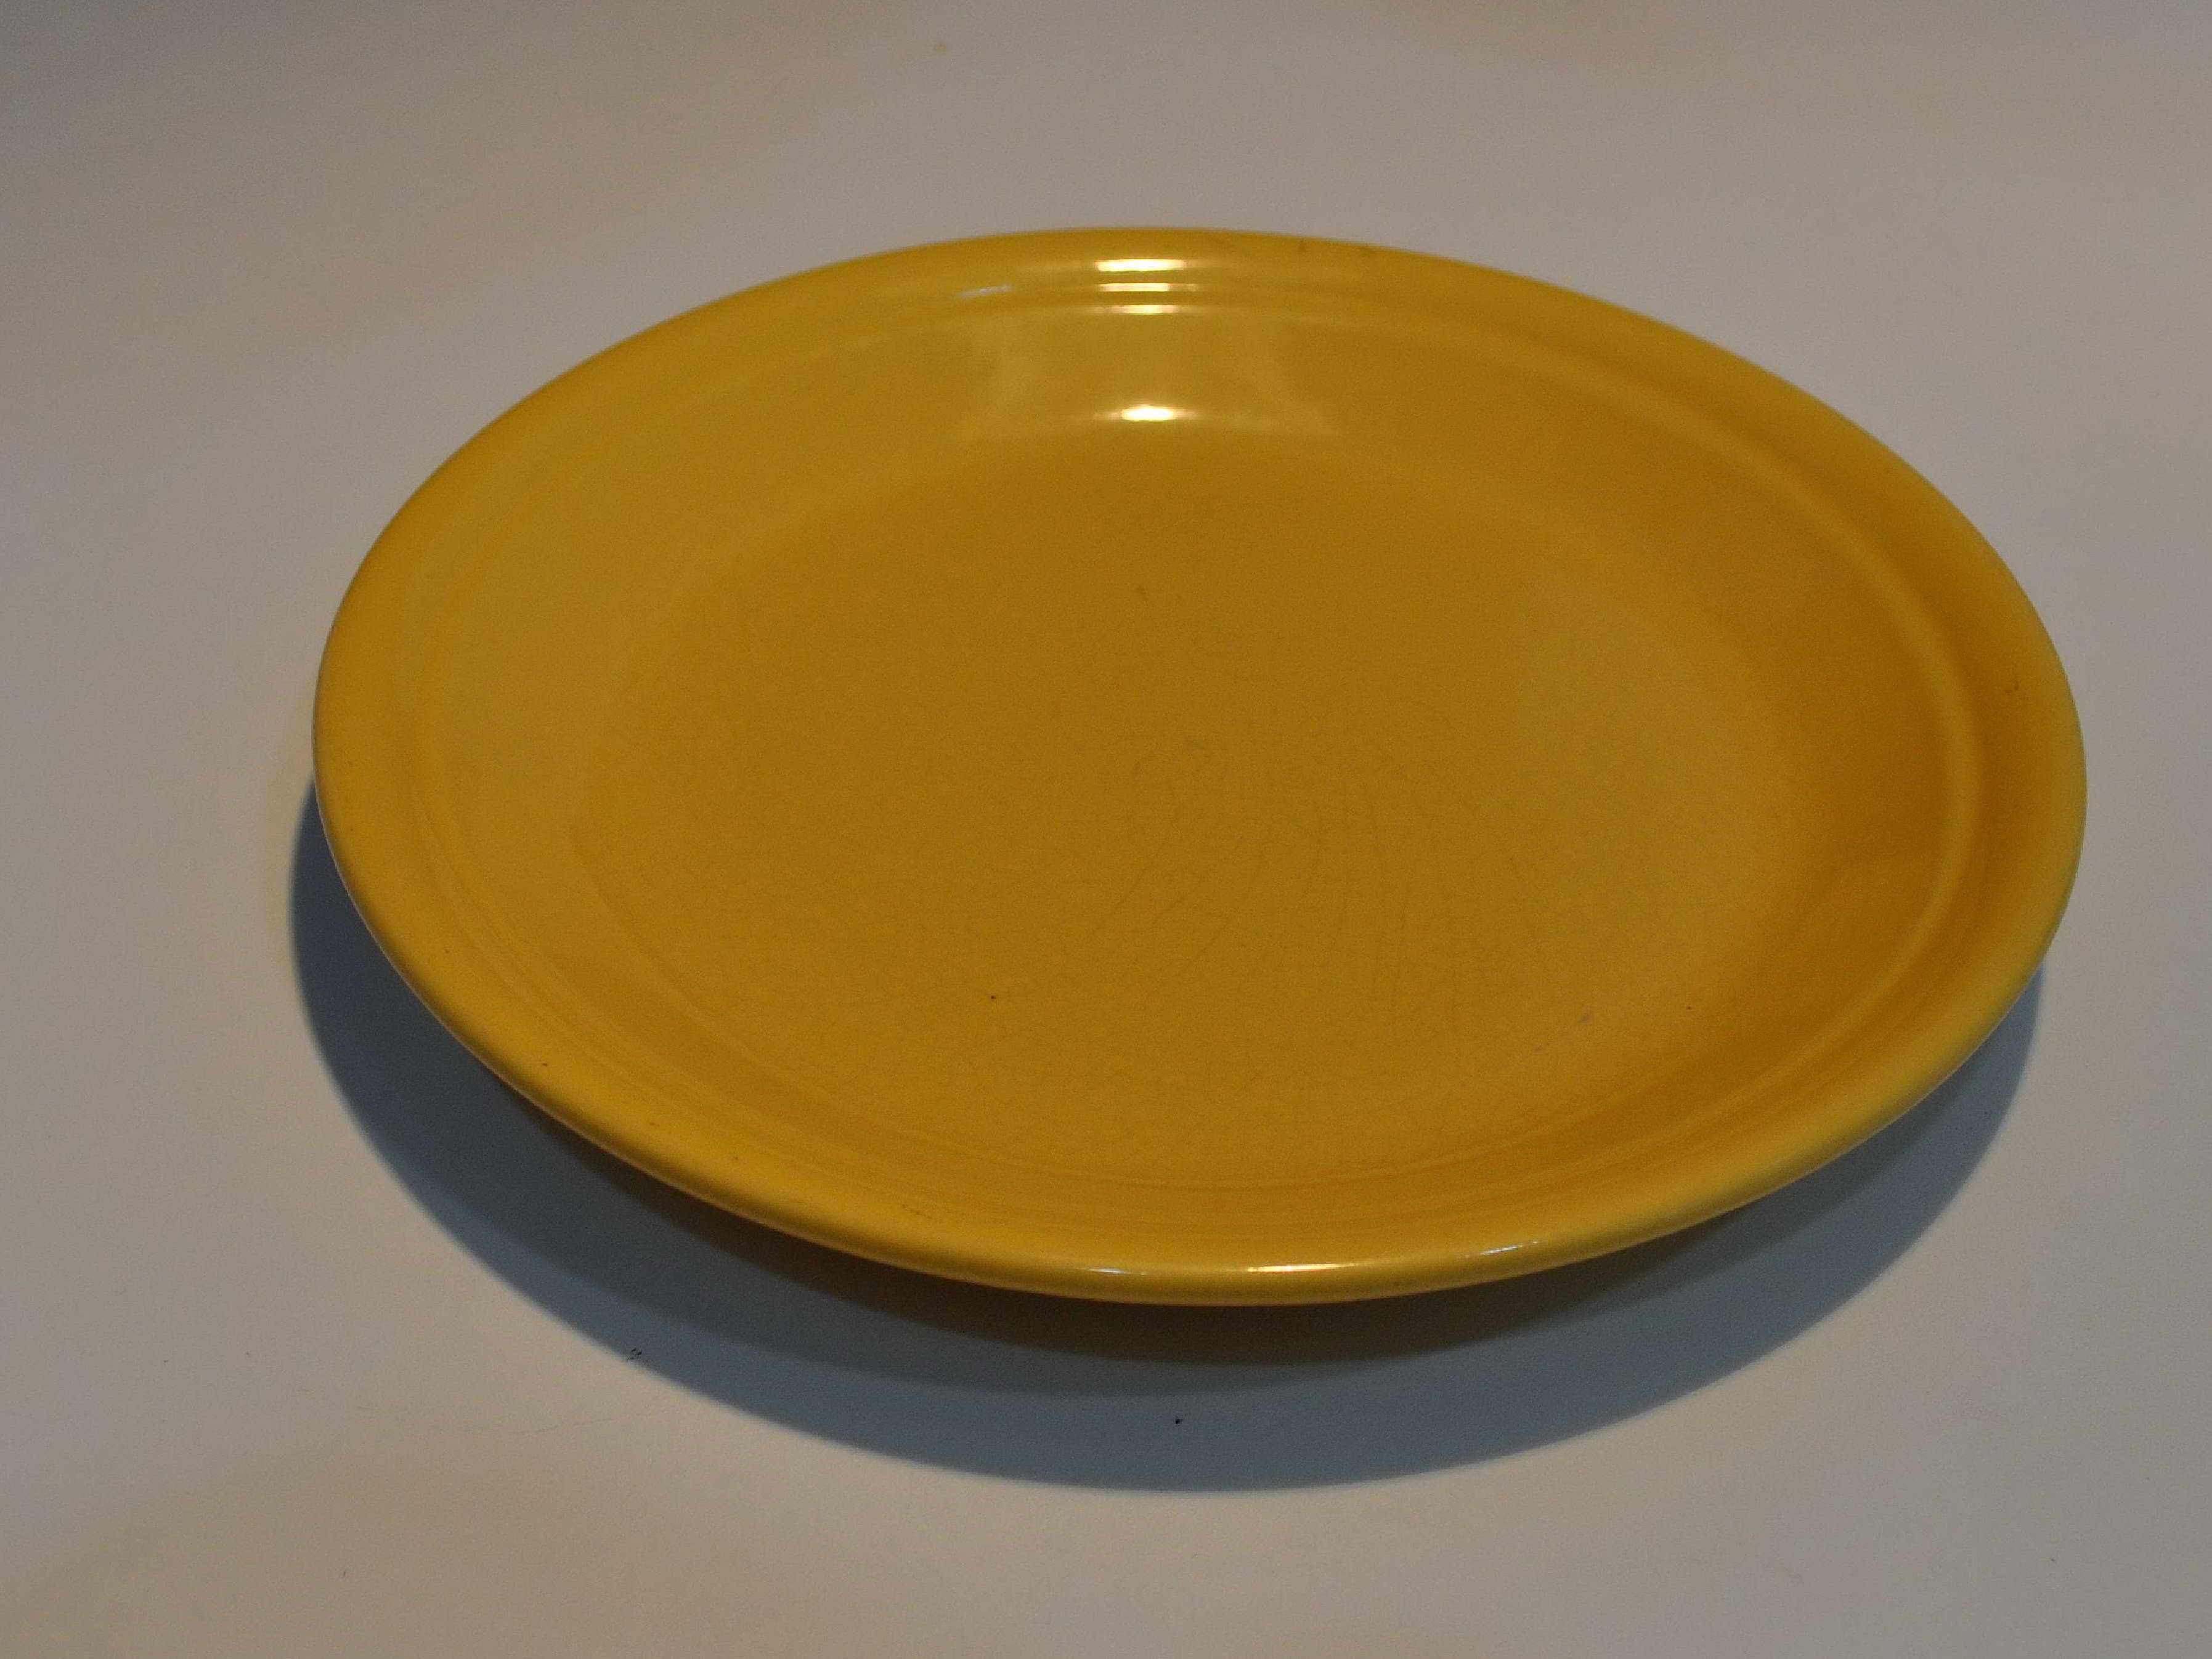 Free picture: yellow, ceramic, plate